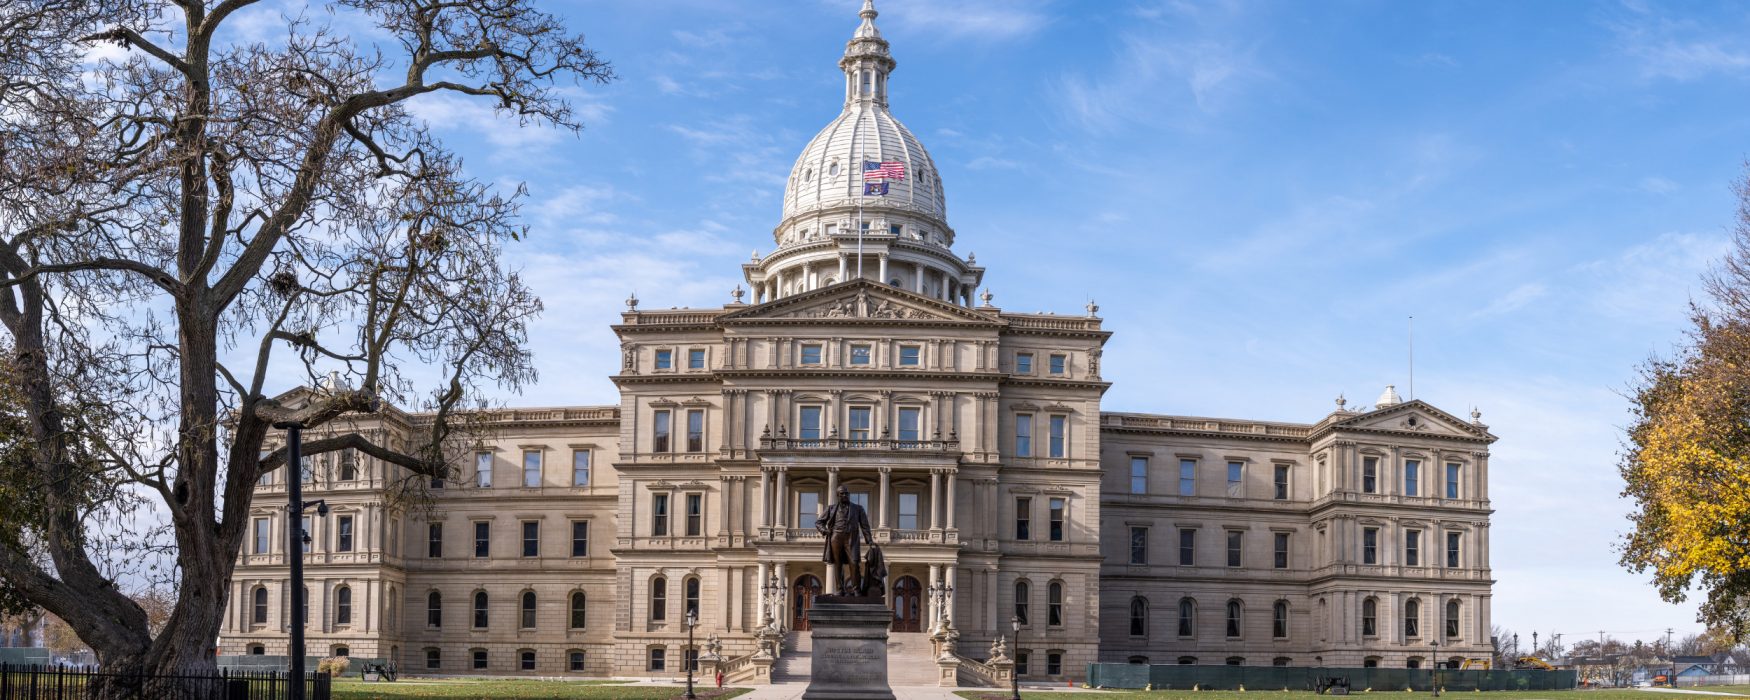 Image of the capitol building in Lansing, Michigan